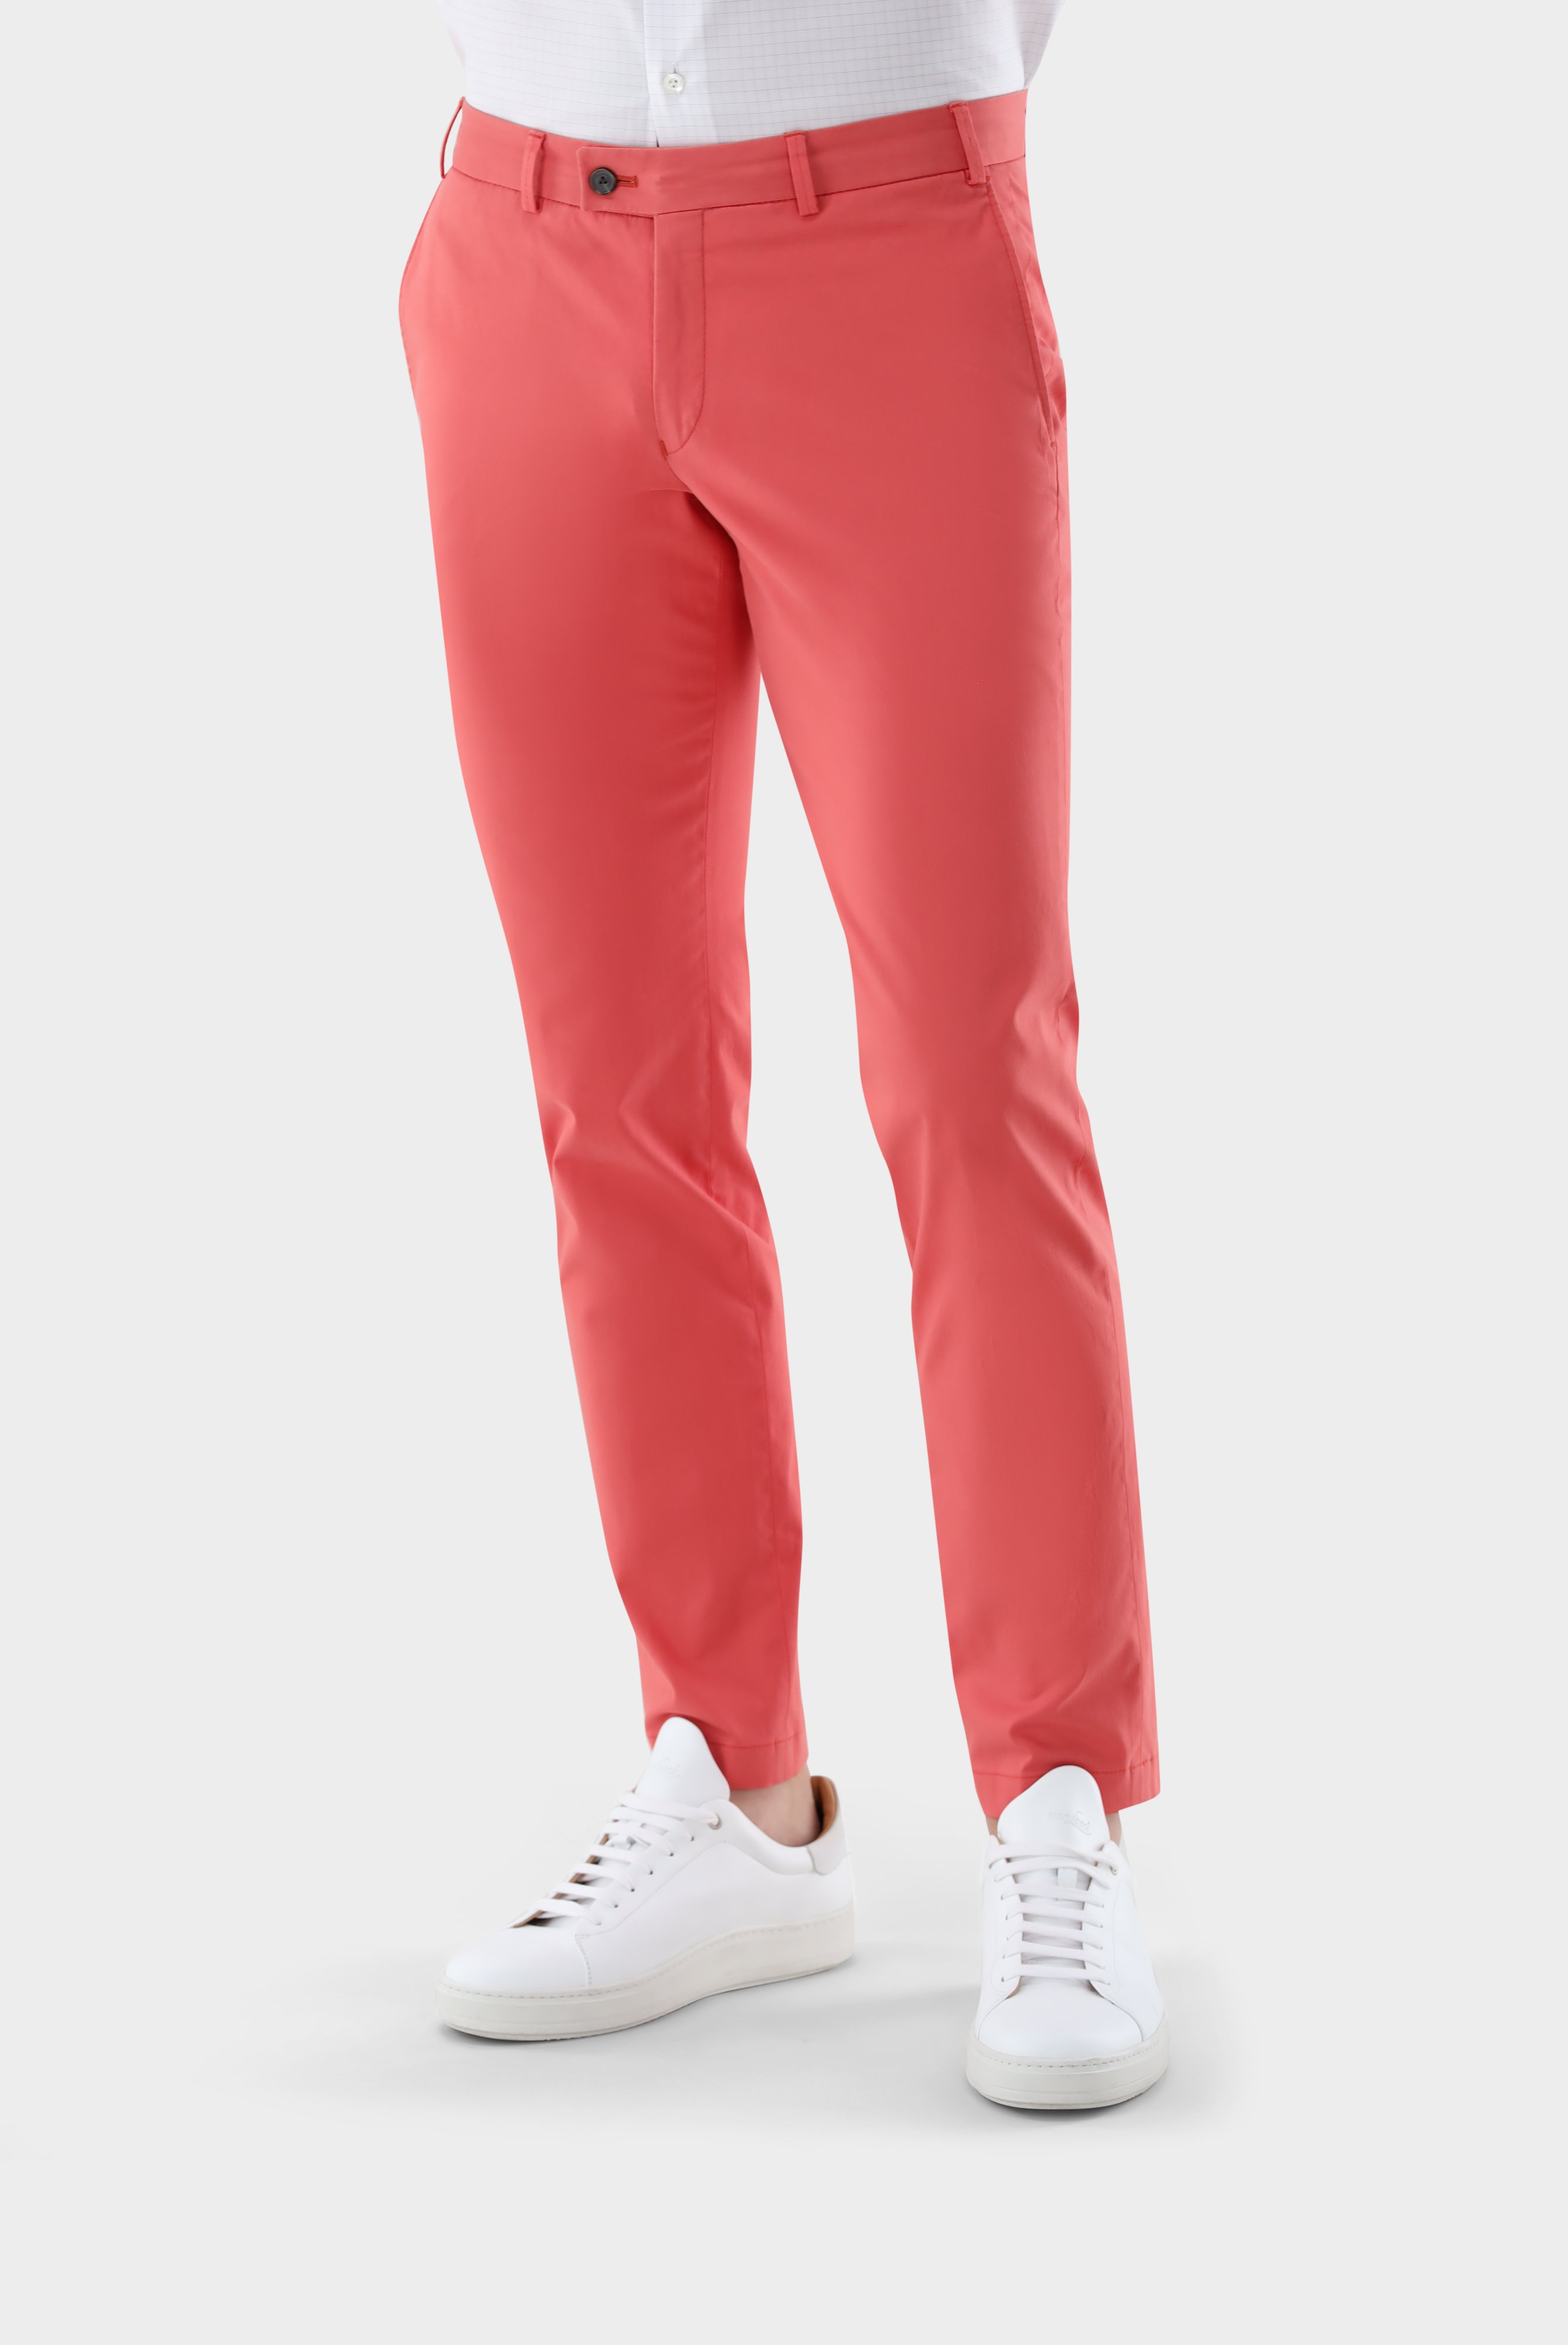 Jeans & Trousers+Cotton with Stretch Tapered Chinos+80.7858..J00151.440.50